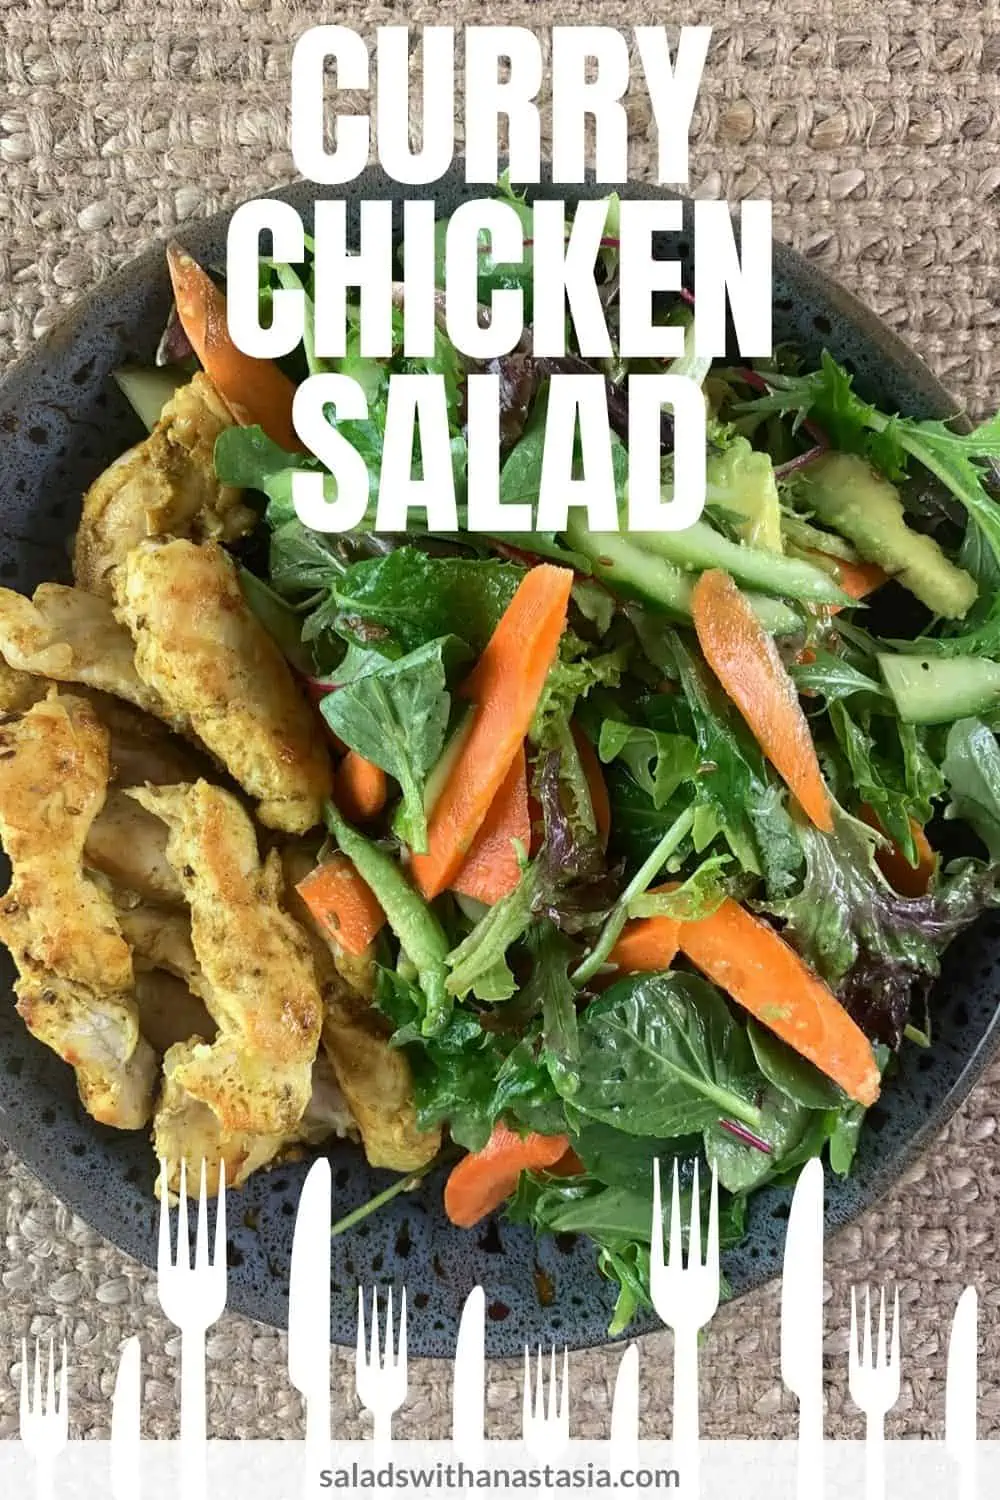 Keto Curry Chicken Salad in a dark grey patterned bowl sitting on top a hessian place matt with a text and graphic overlay.